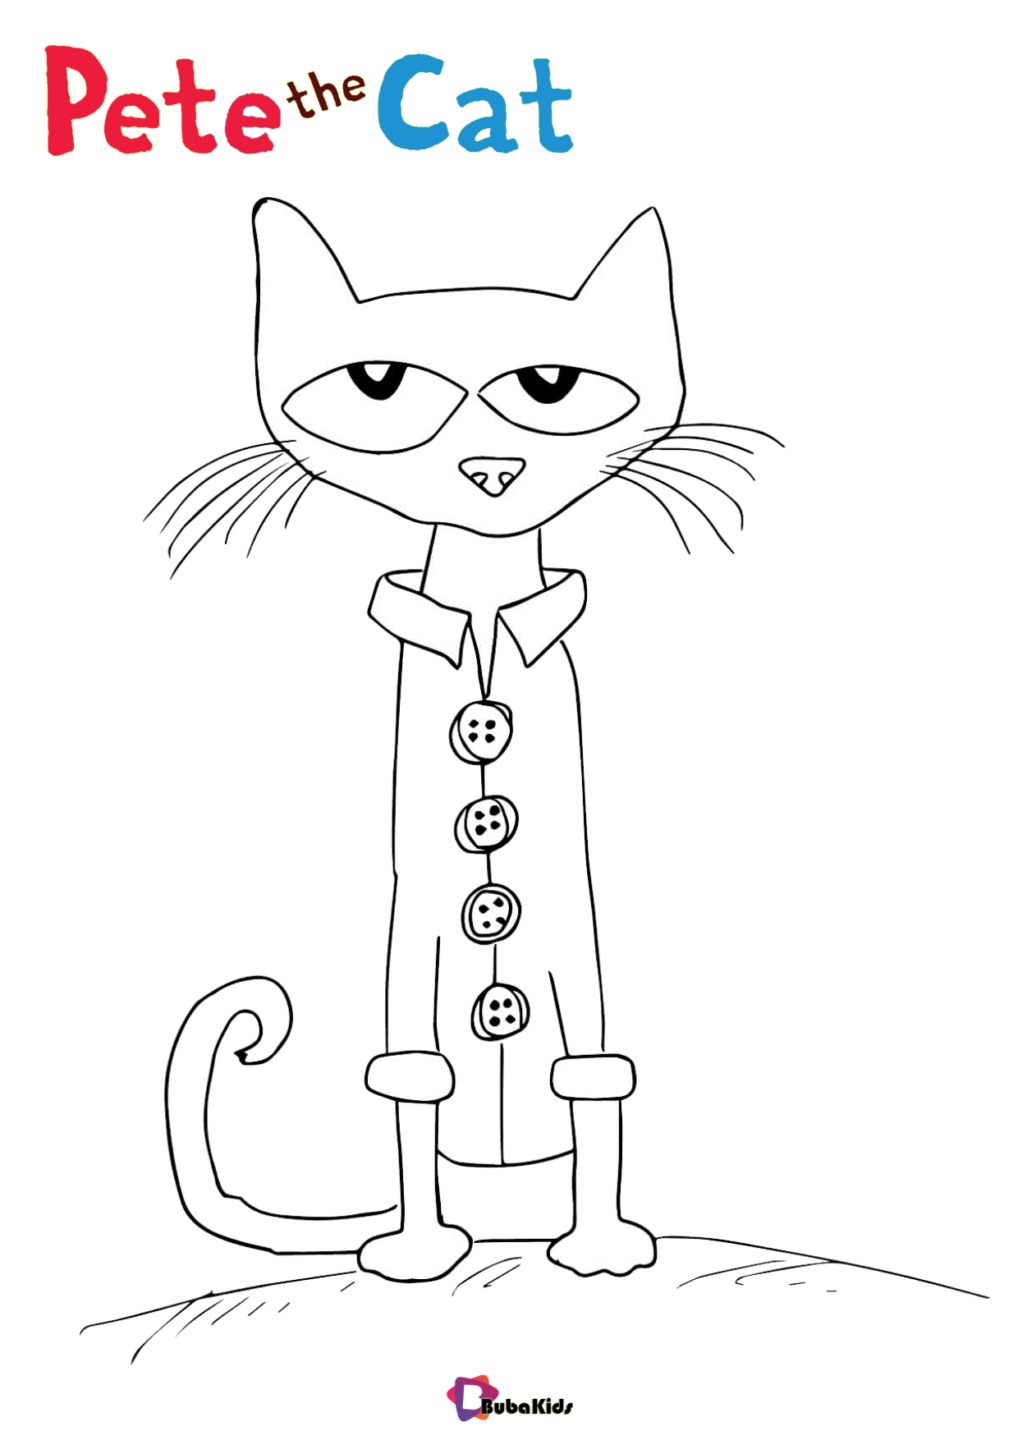 Pete the cat coloring page